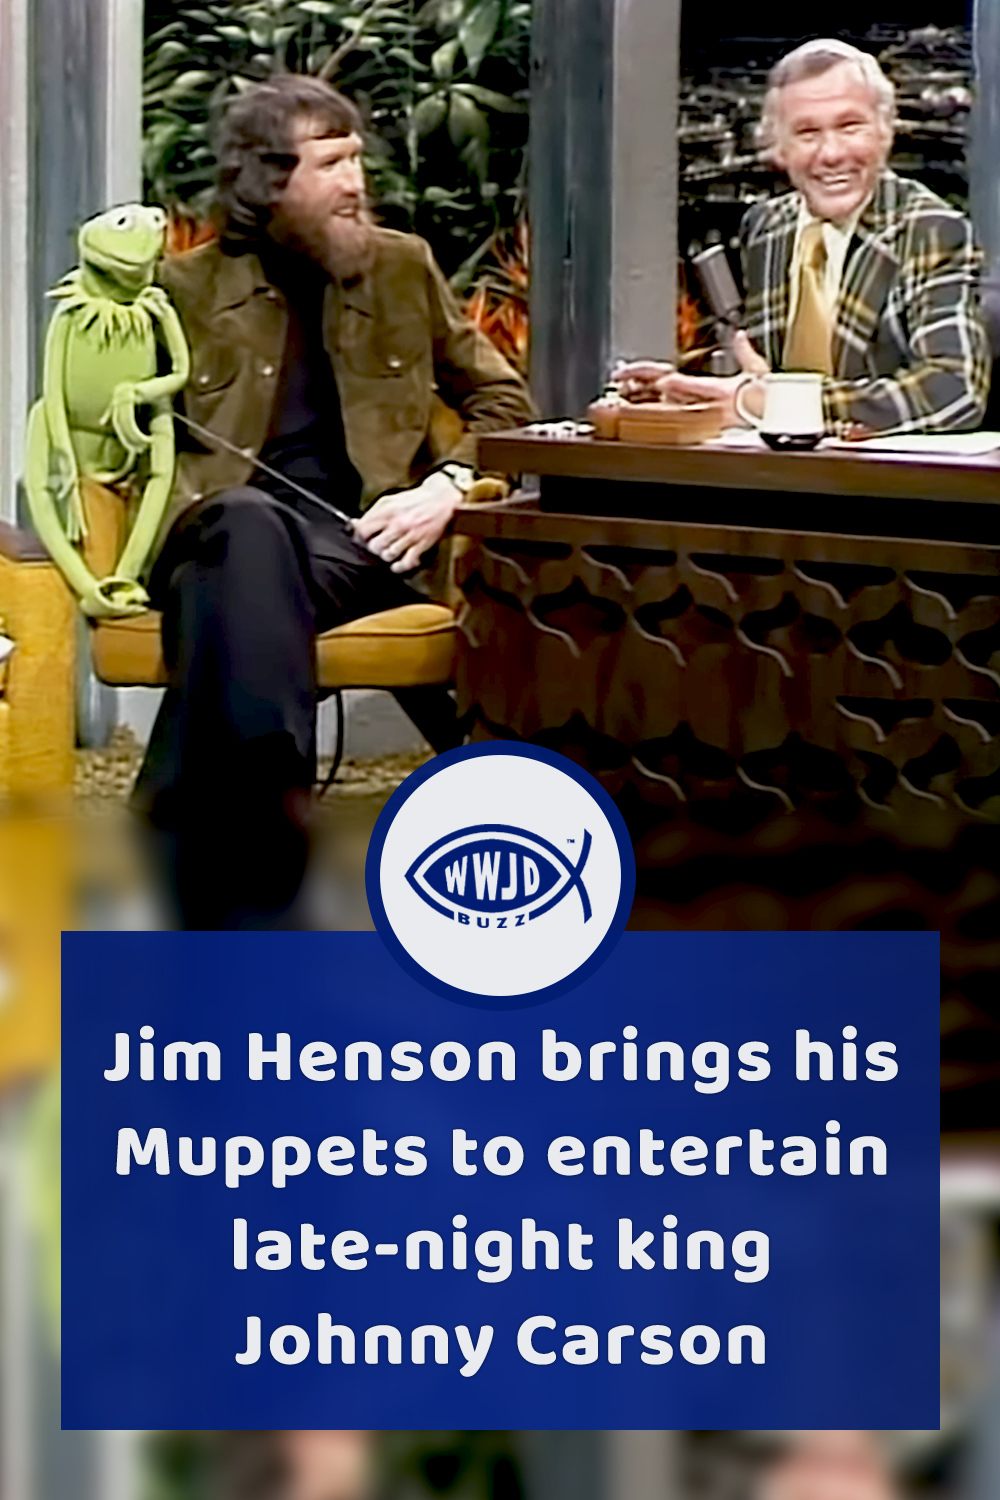 Jim Henson brings his Muppets to entertain late-night king Johnny Carson